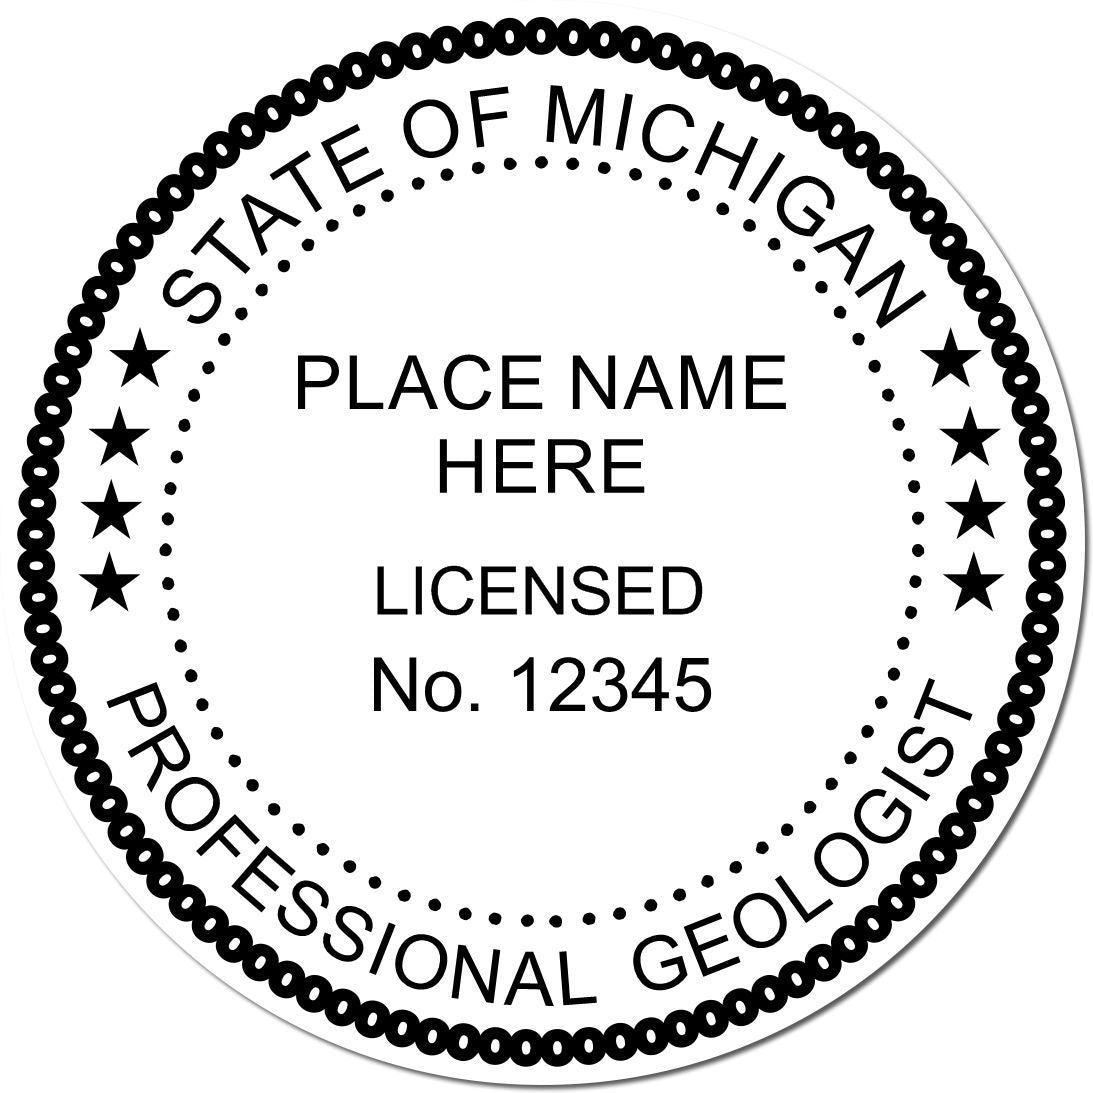 This paper is stamped with a sample imprint of the Slim Pre-Inked Michigan Professional Geologist Seal Stamp, signifying its quality and reliability.